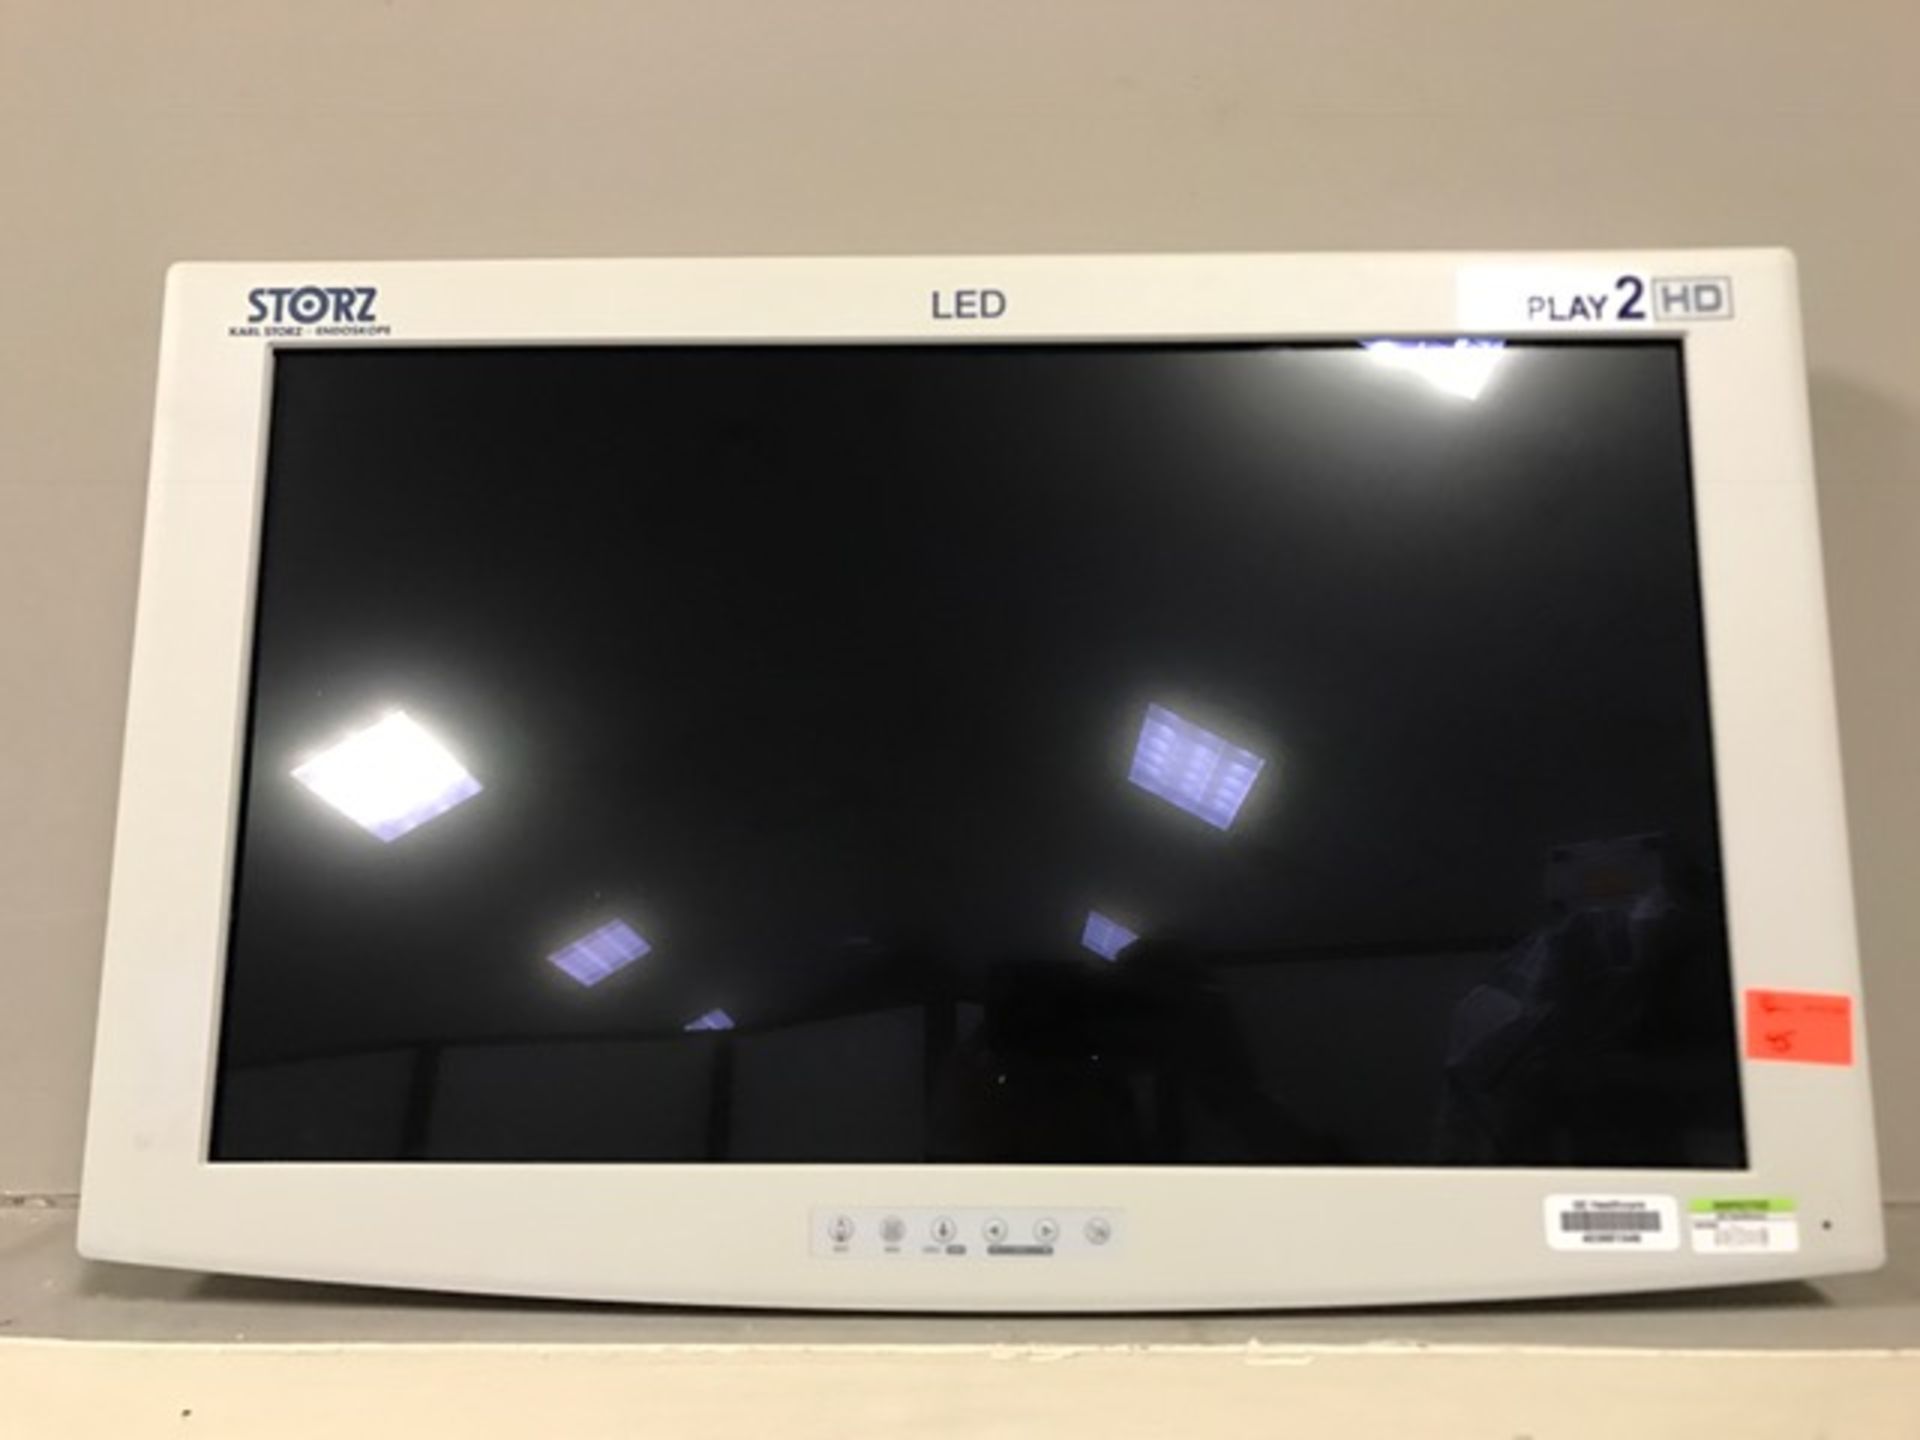 Storz Flat Panel Display, 26", LED, HD, Wall Hung, By NDS Surgical Imaging, Model: SC-WU26-A1511,